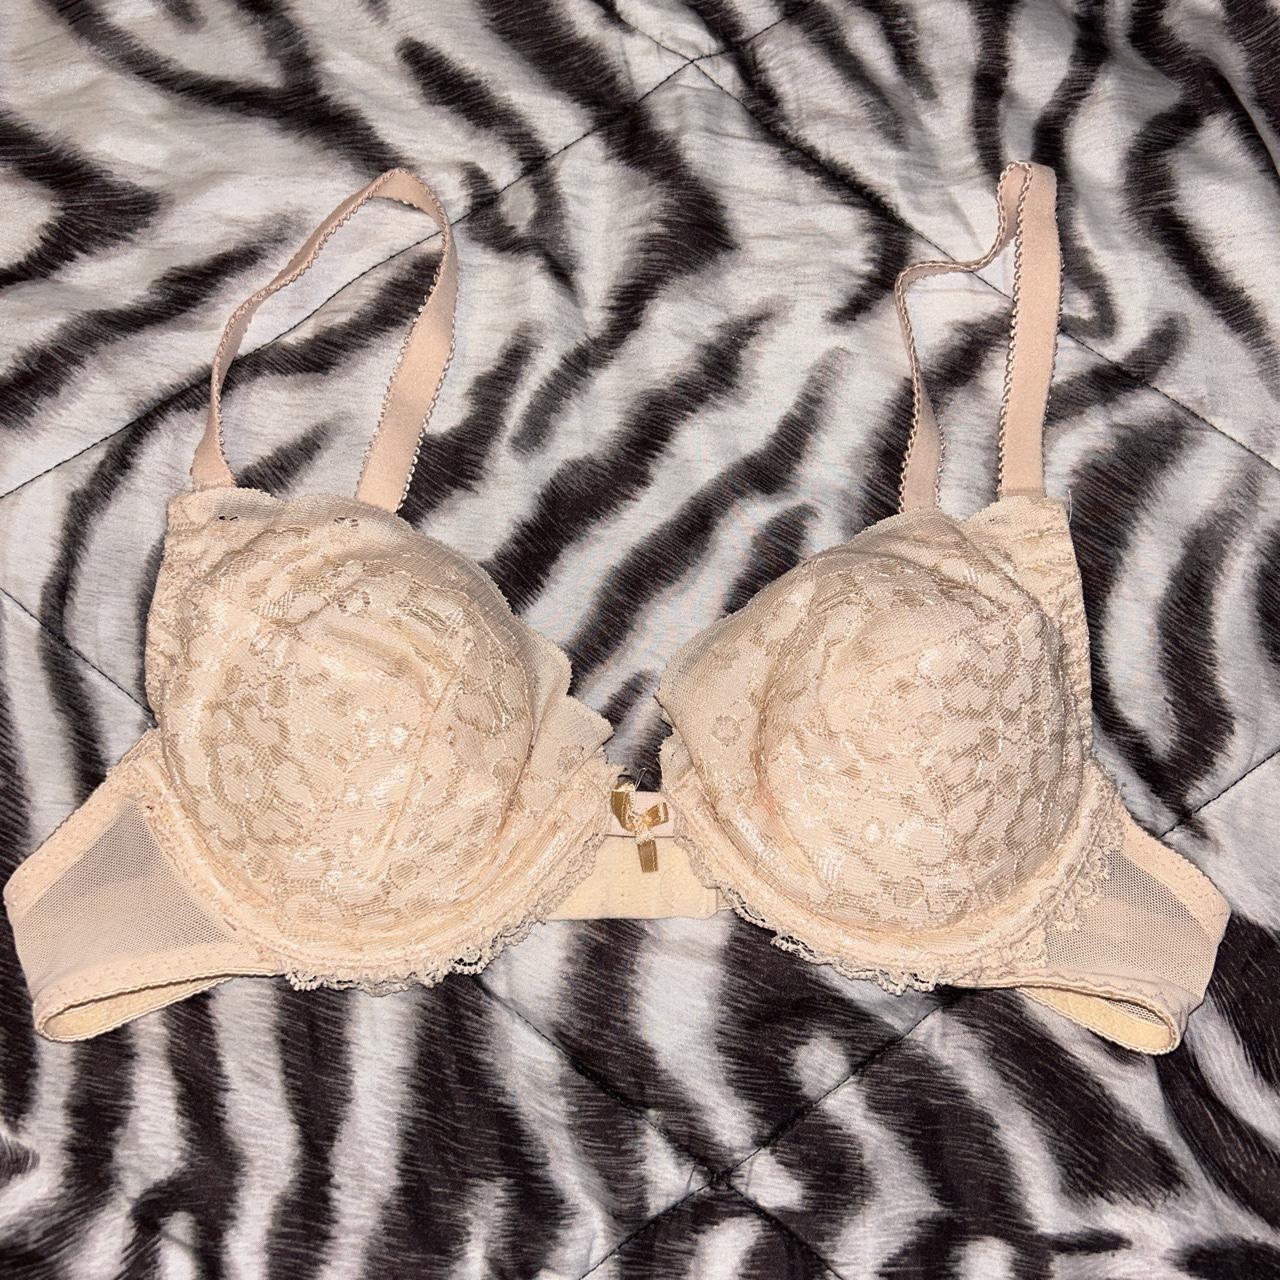 36A bra, I think I bought this in Mexico. Brand